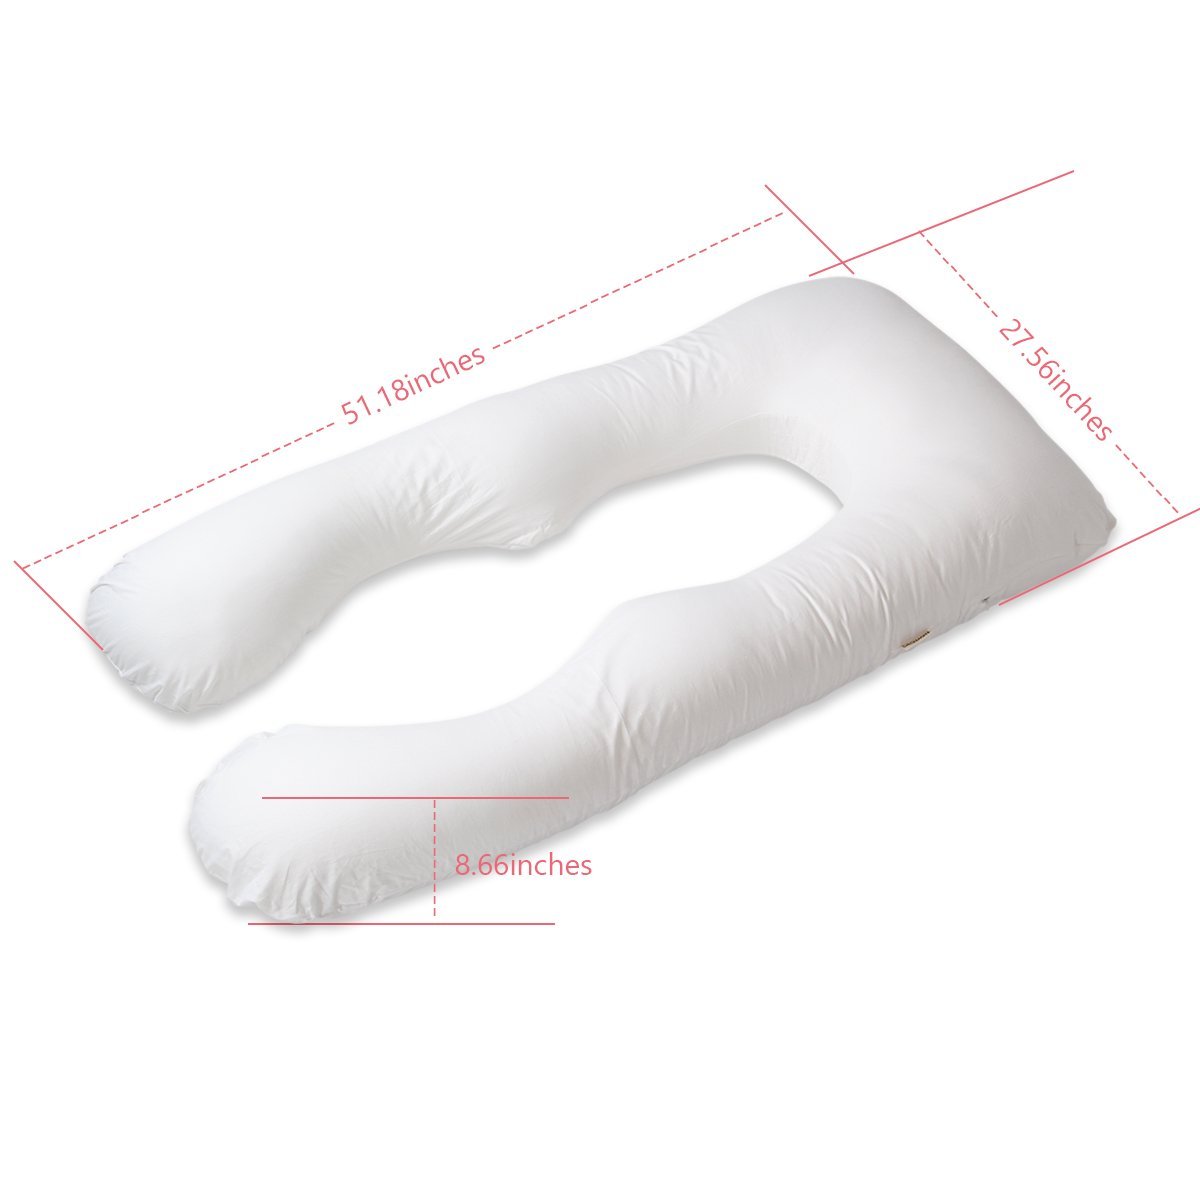 Pregnancy Pillow, iFanze U-shaped Pregnancy Cushion Total Body Support Maternity Pillows 130cm